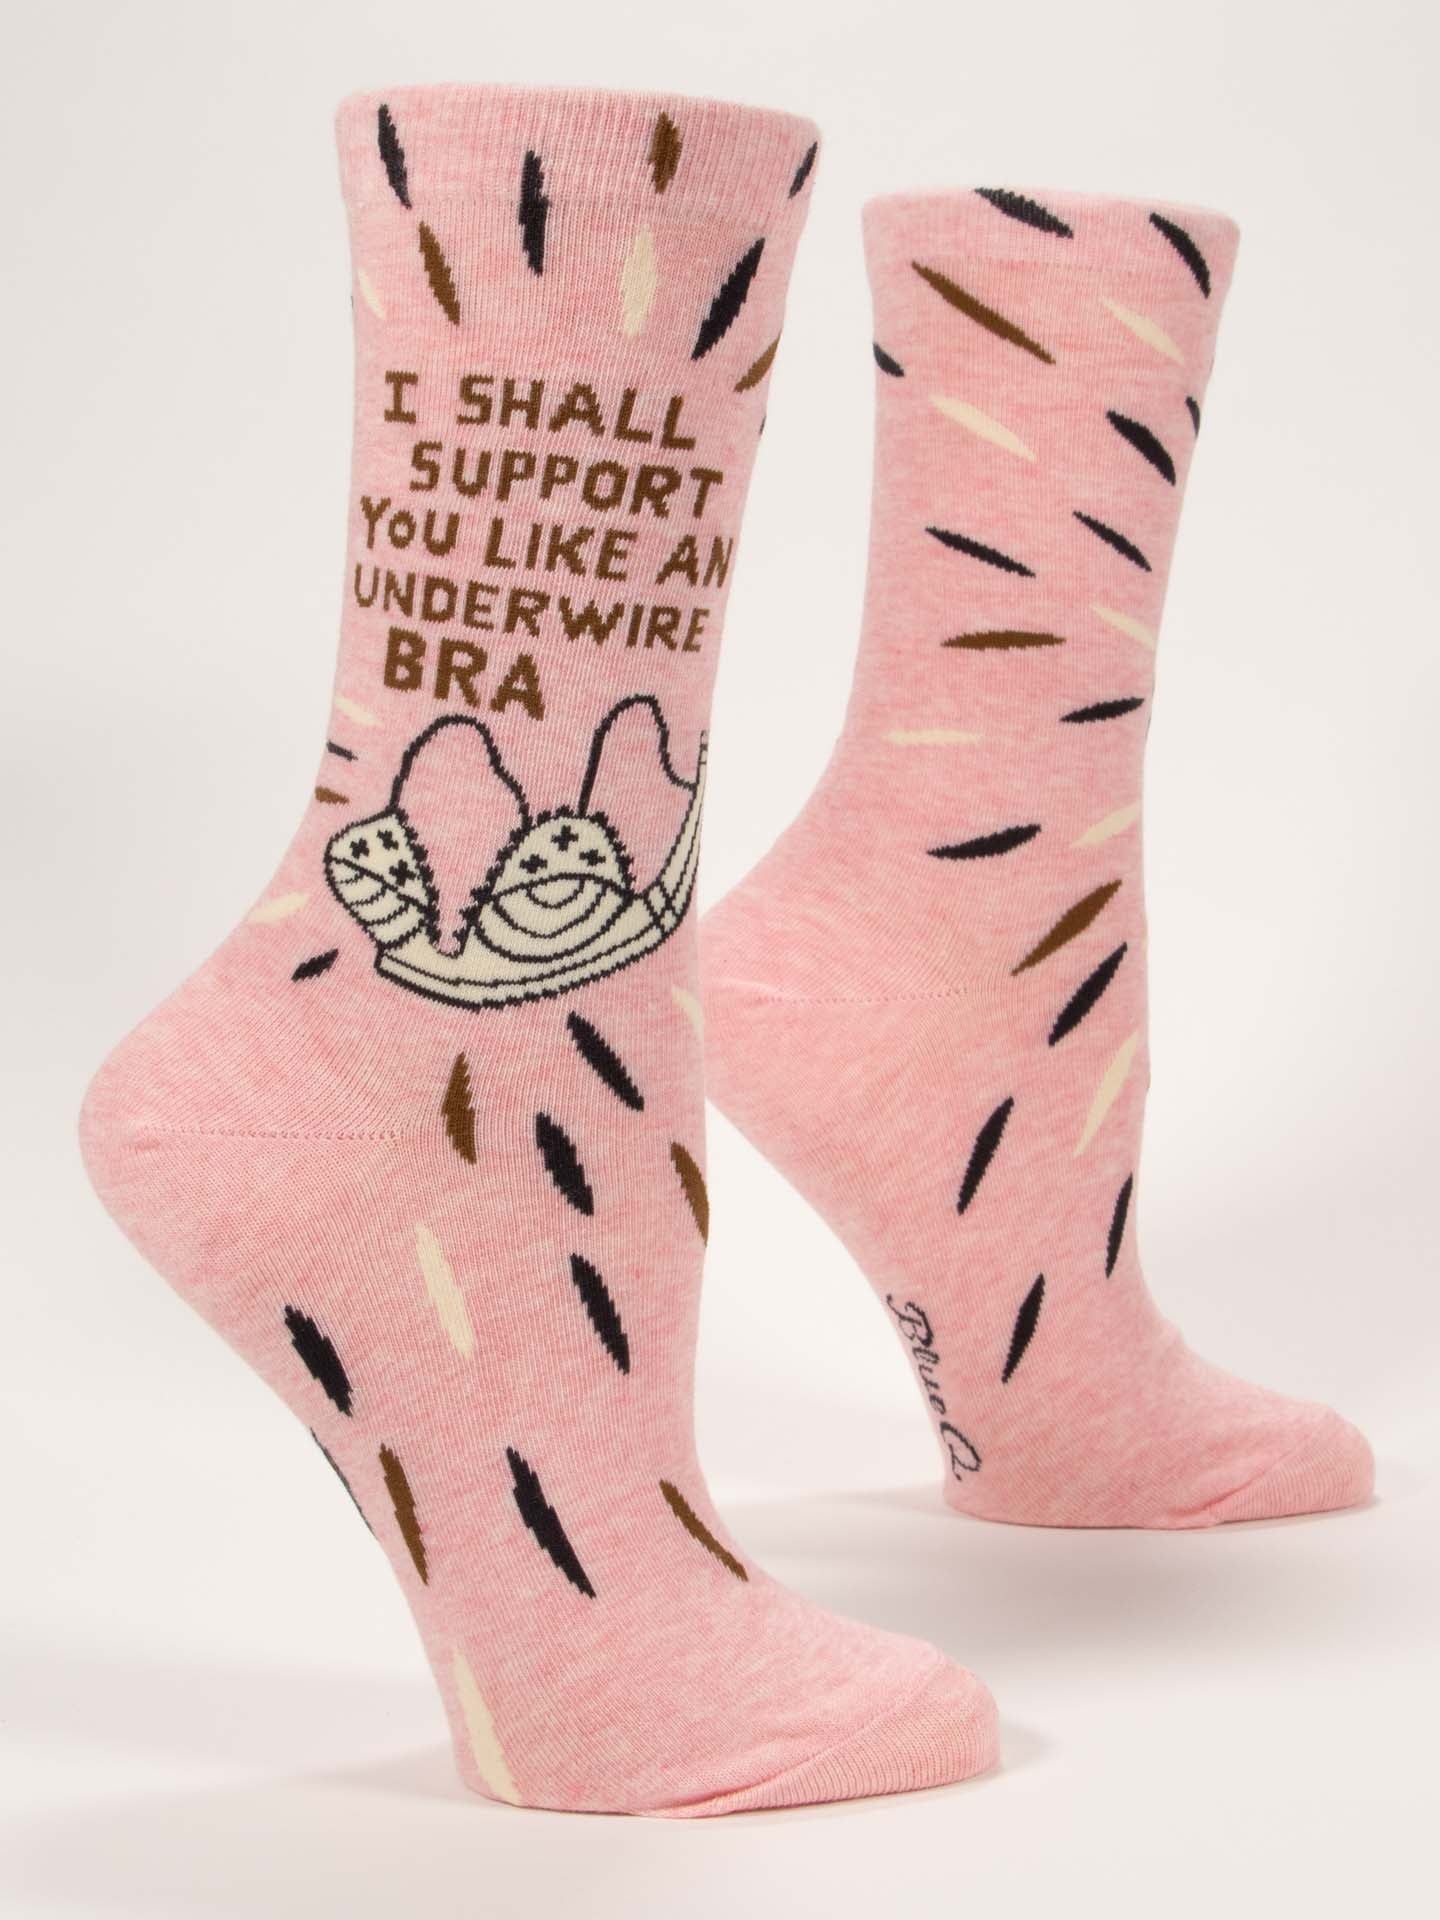 I Shall Support You Like An Underwire Bra Women's Crew Socks-Apparel > Apparel & Accessories > Clothing > Underwear & Socks-Quinn's Mercantile